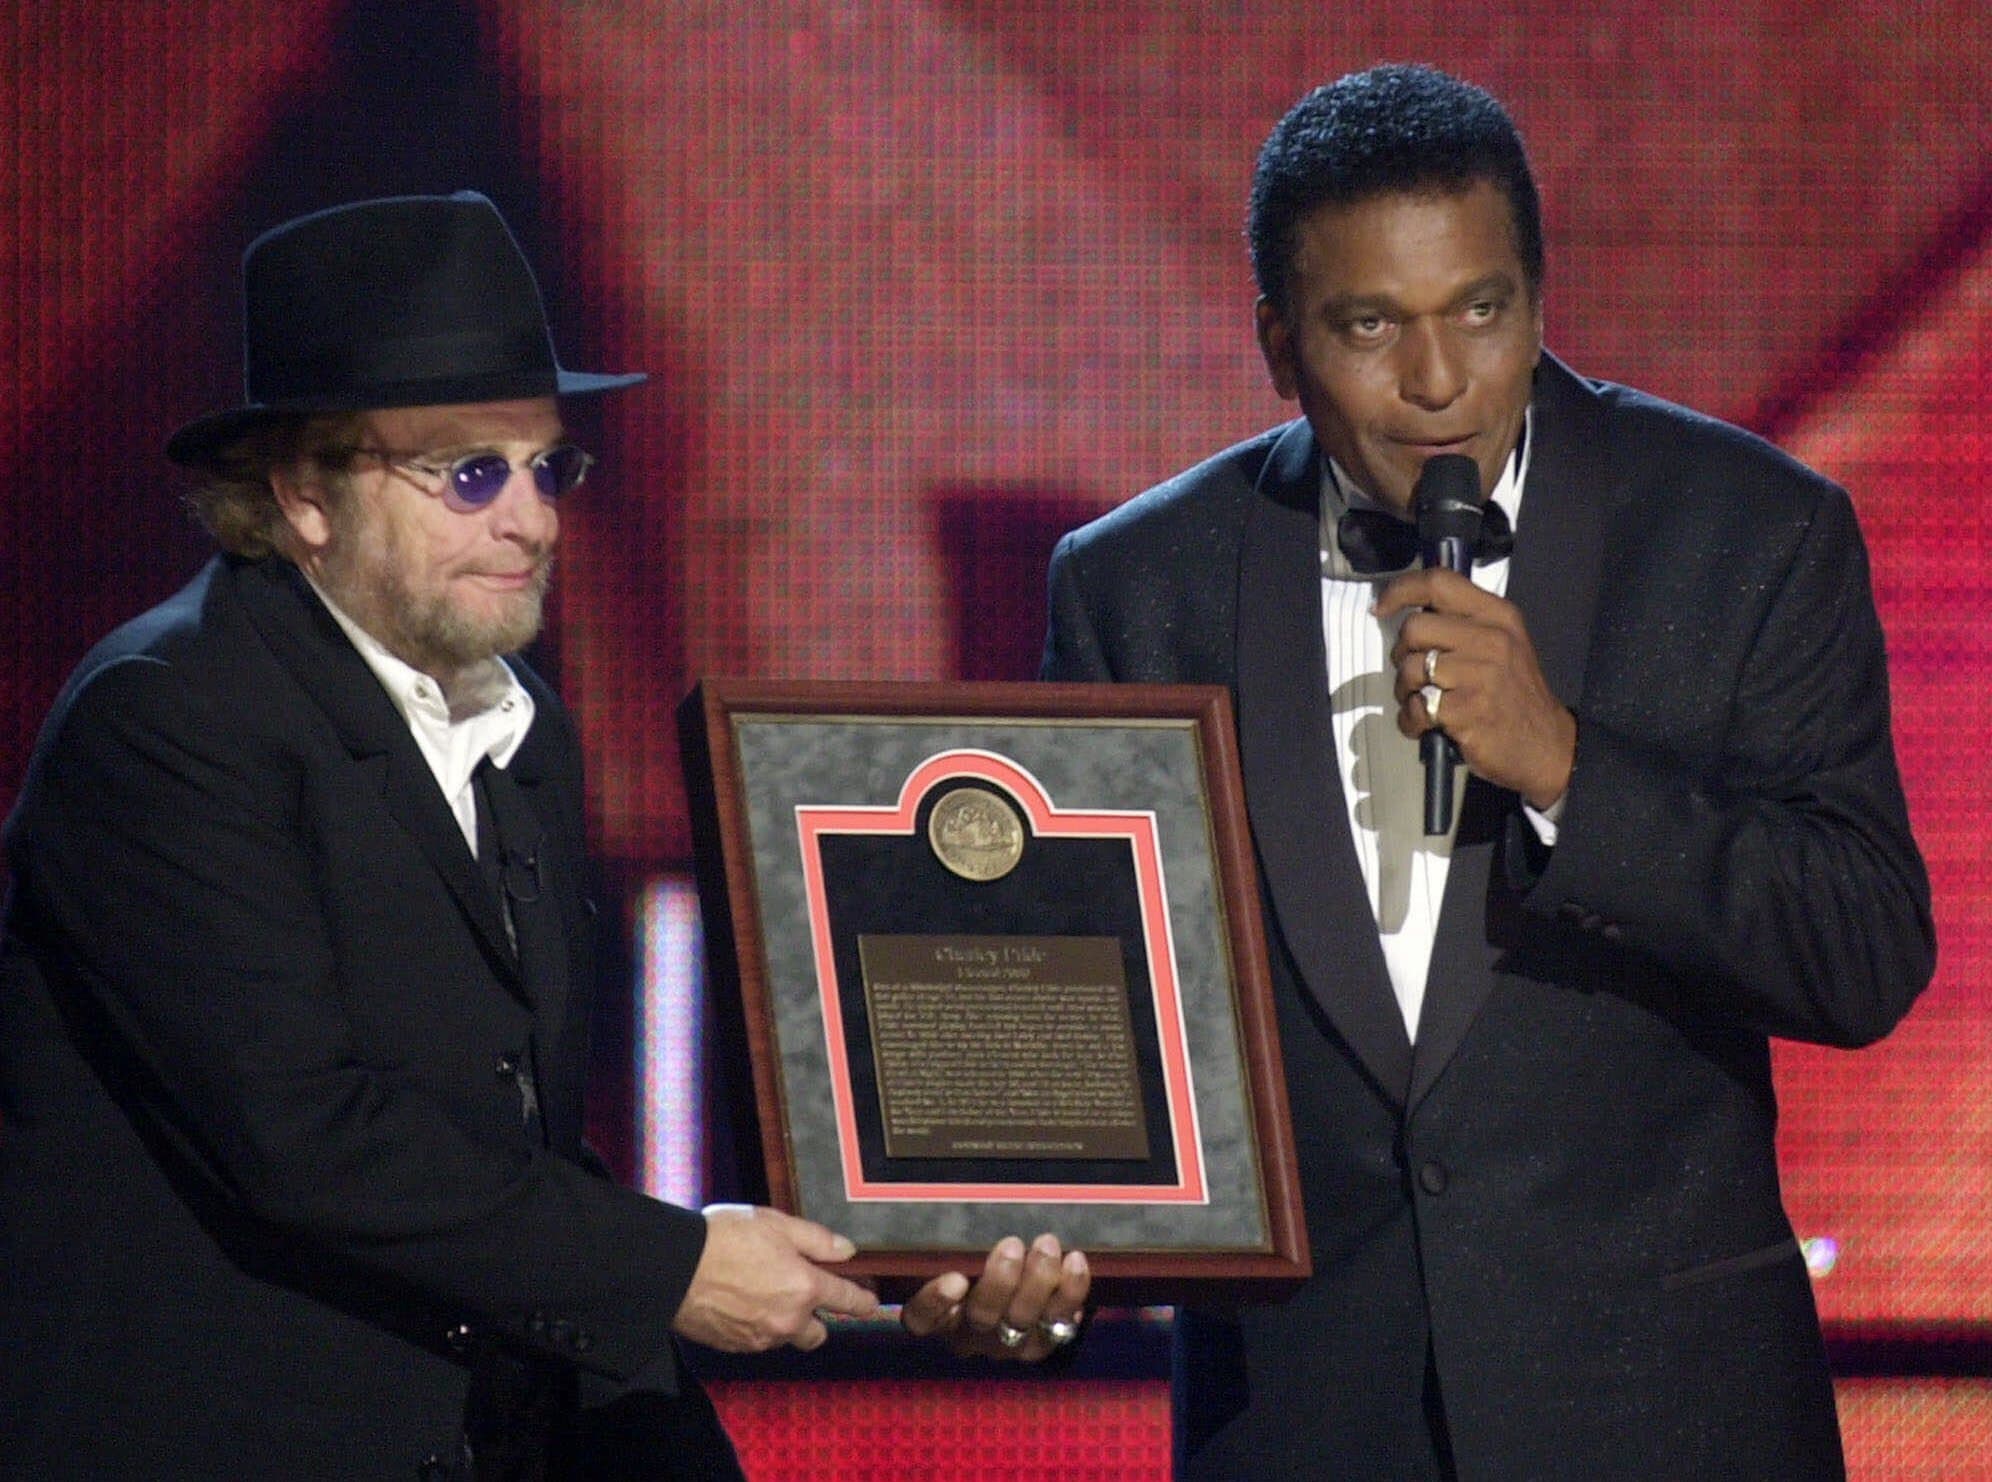 In this Oct. 4, 2000, photo, Charley Pride, right, receives his Country Music Hall of Fame plaque from Merle Haggard at the Country Music Association Awards show at the Grand Ole Opry House in Nashville, Tenn. (Charlie Neibergall/AP)